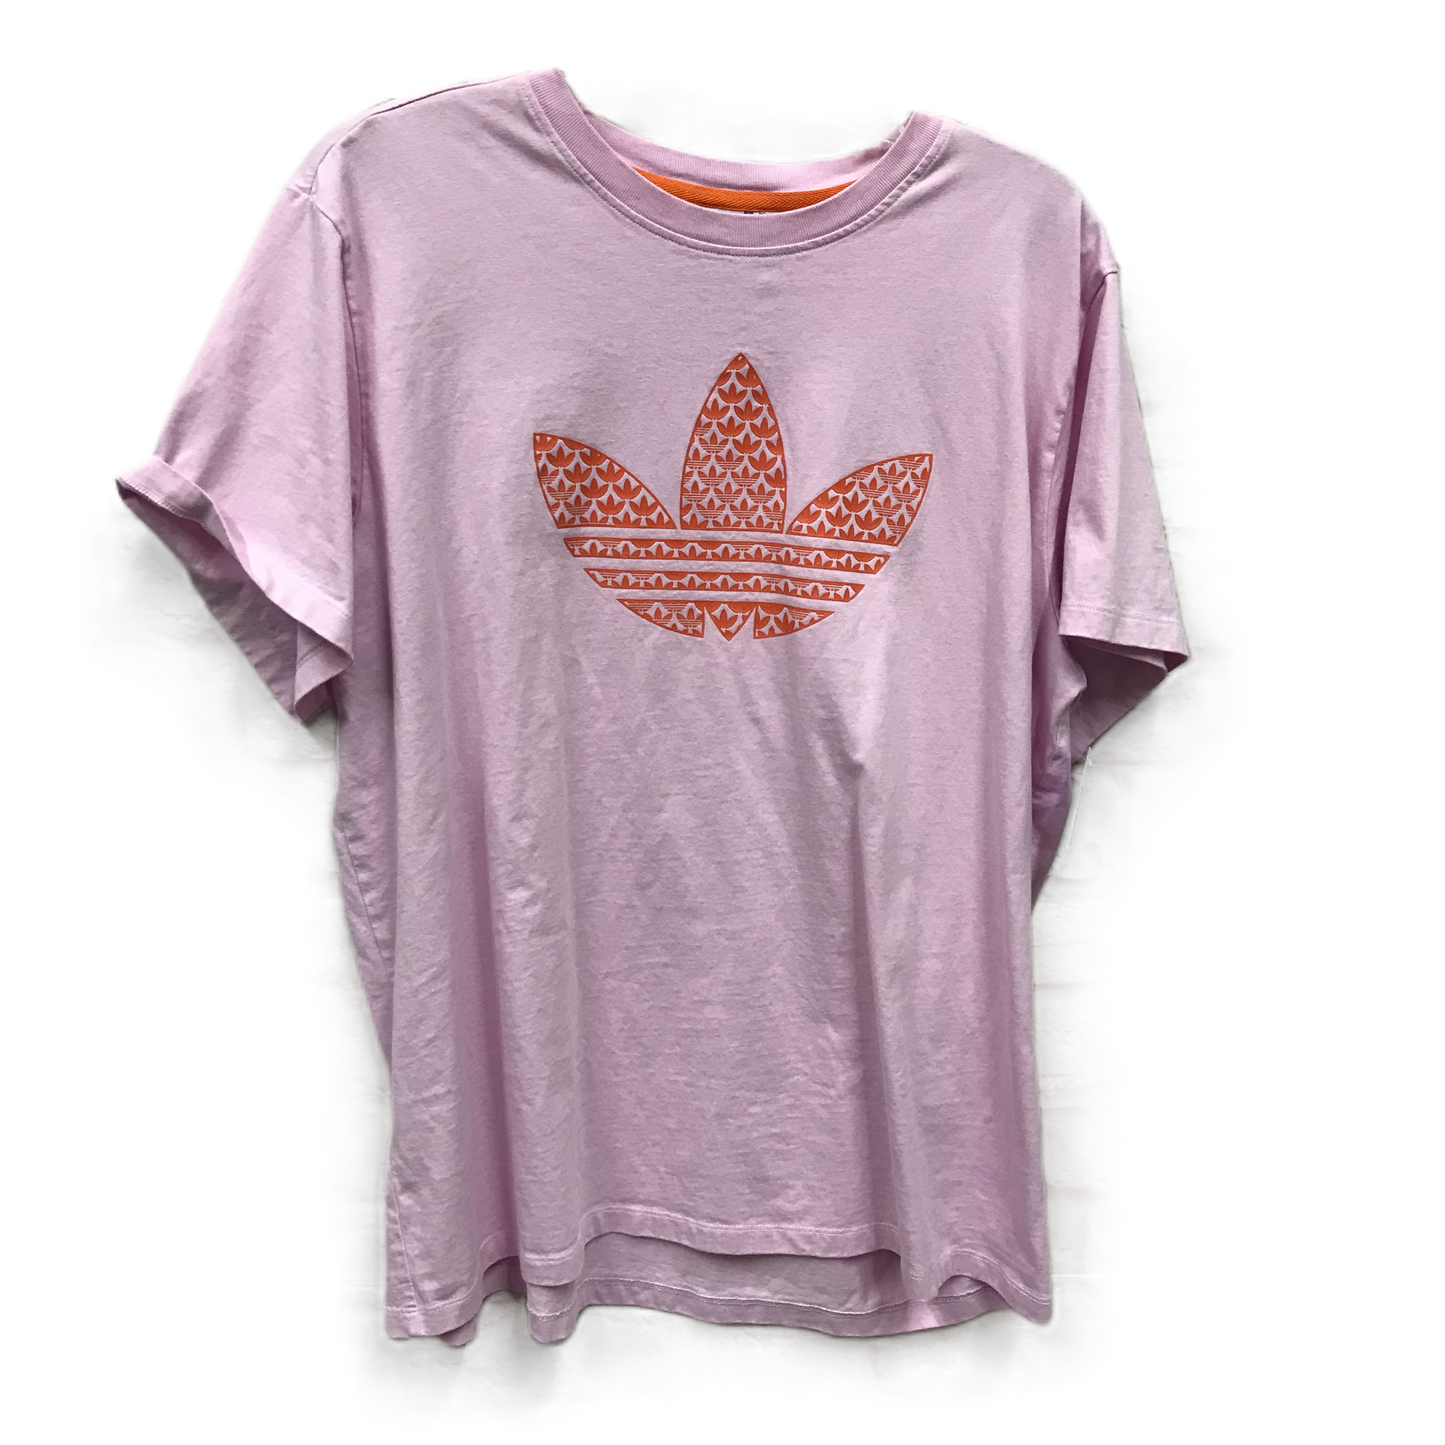 Pink Athletic Top Short Sleeve By Adidas, Size: Xl